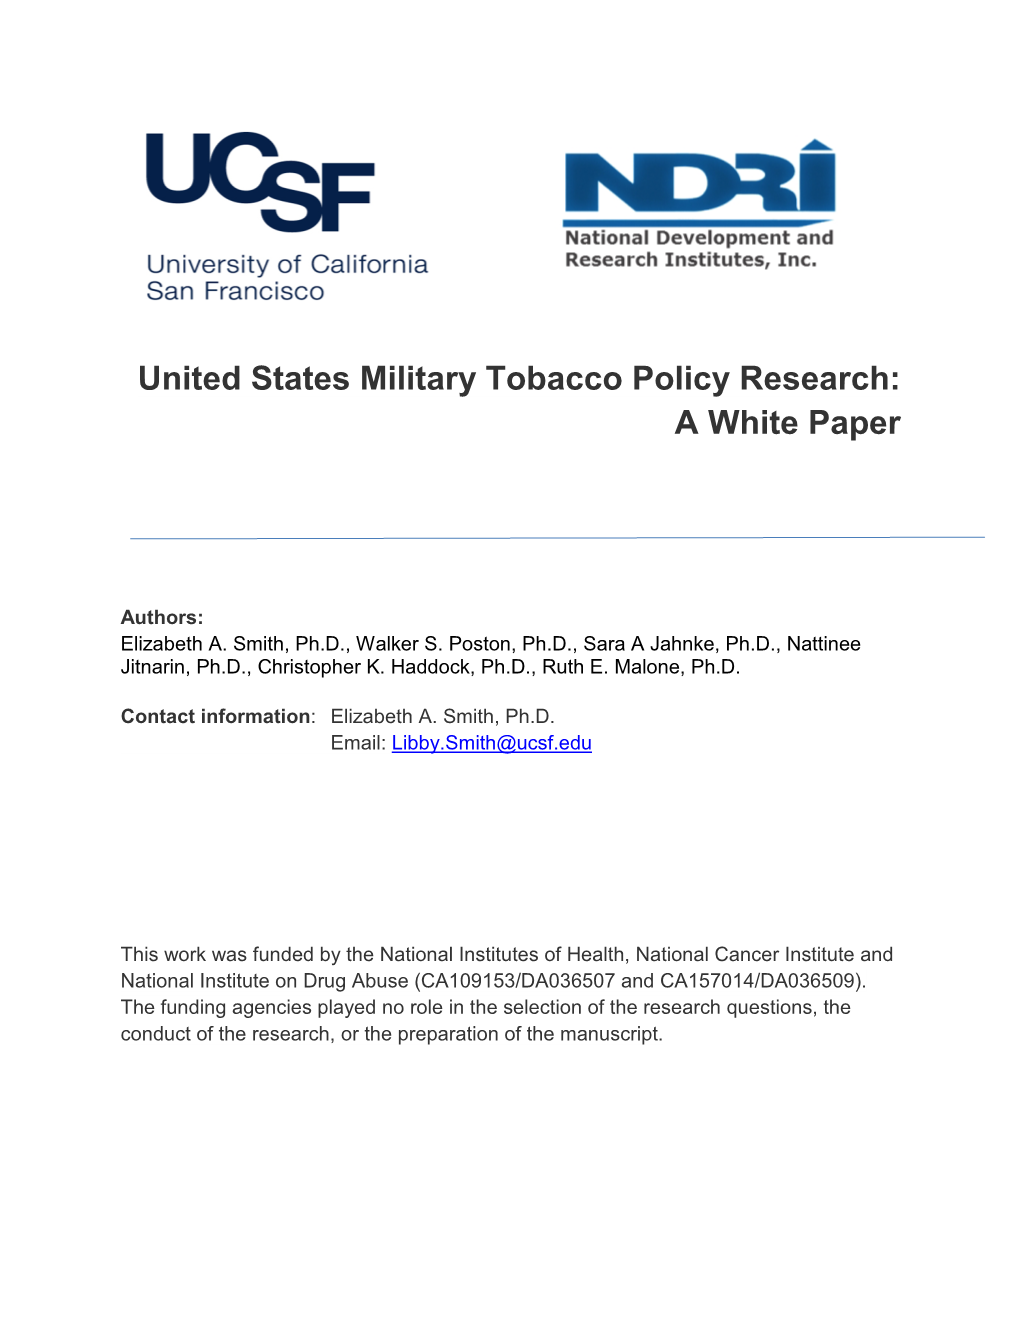 United States Military Tobacco Policy Research: a White Paper